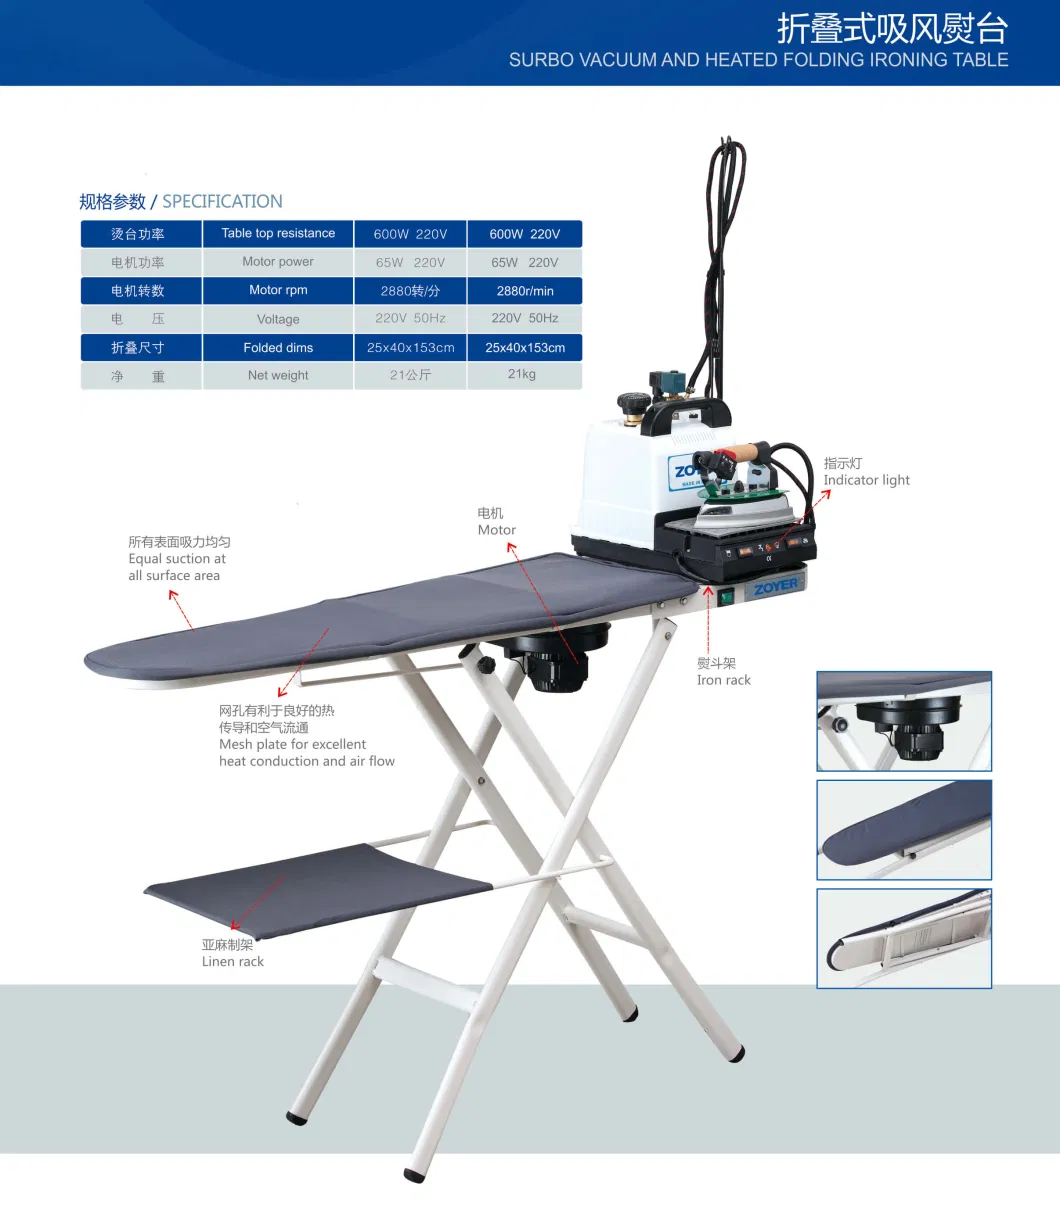 Zy-It2007 Turbo Vacuum and Heated Folding Ironing Table Heating Table